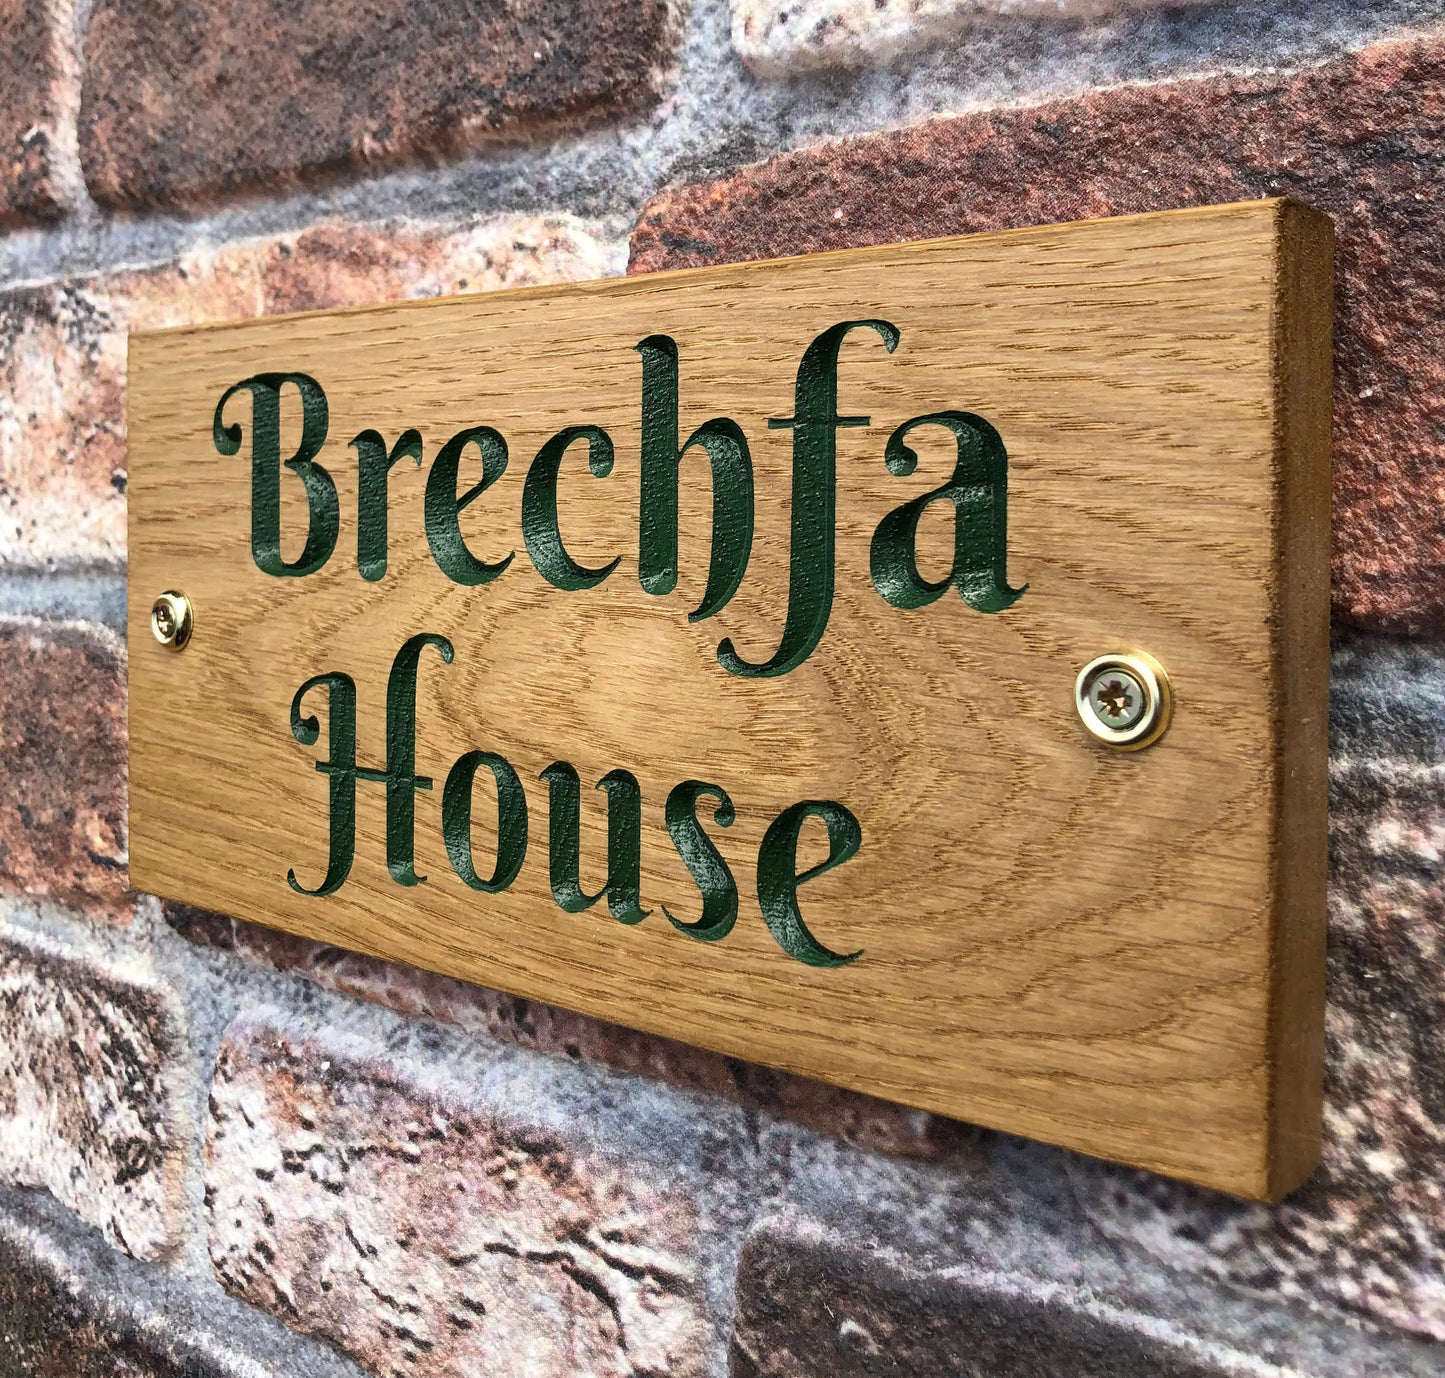 Solid Oak Engraved Hardwood House Sign 250mm x 120mm x 20mm, Personalised Carved Home Name Plate Plaque